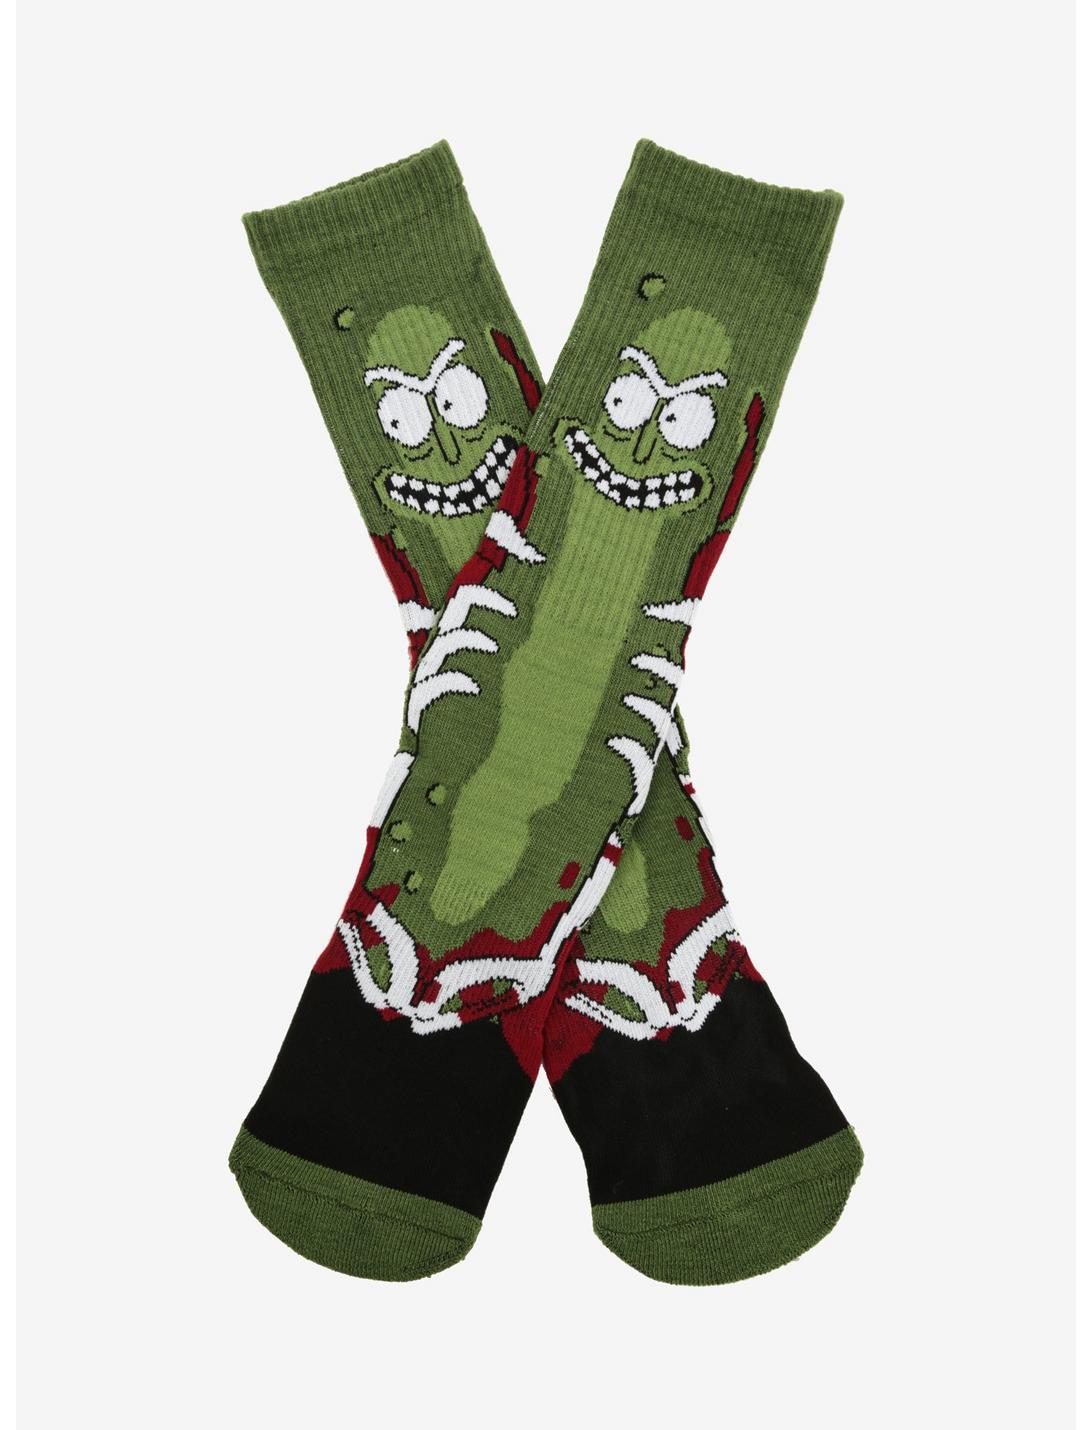 Rick And Morty Battle Pickle Rick Socks - BoxLunch Exclusive, , hi-res